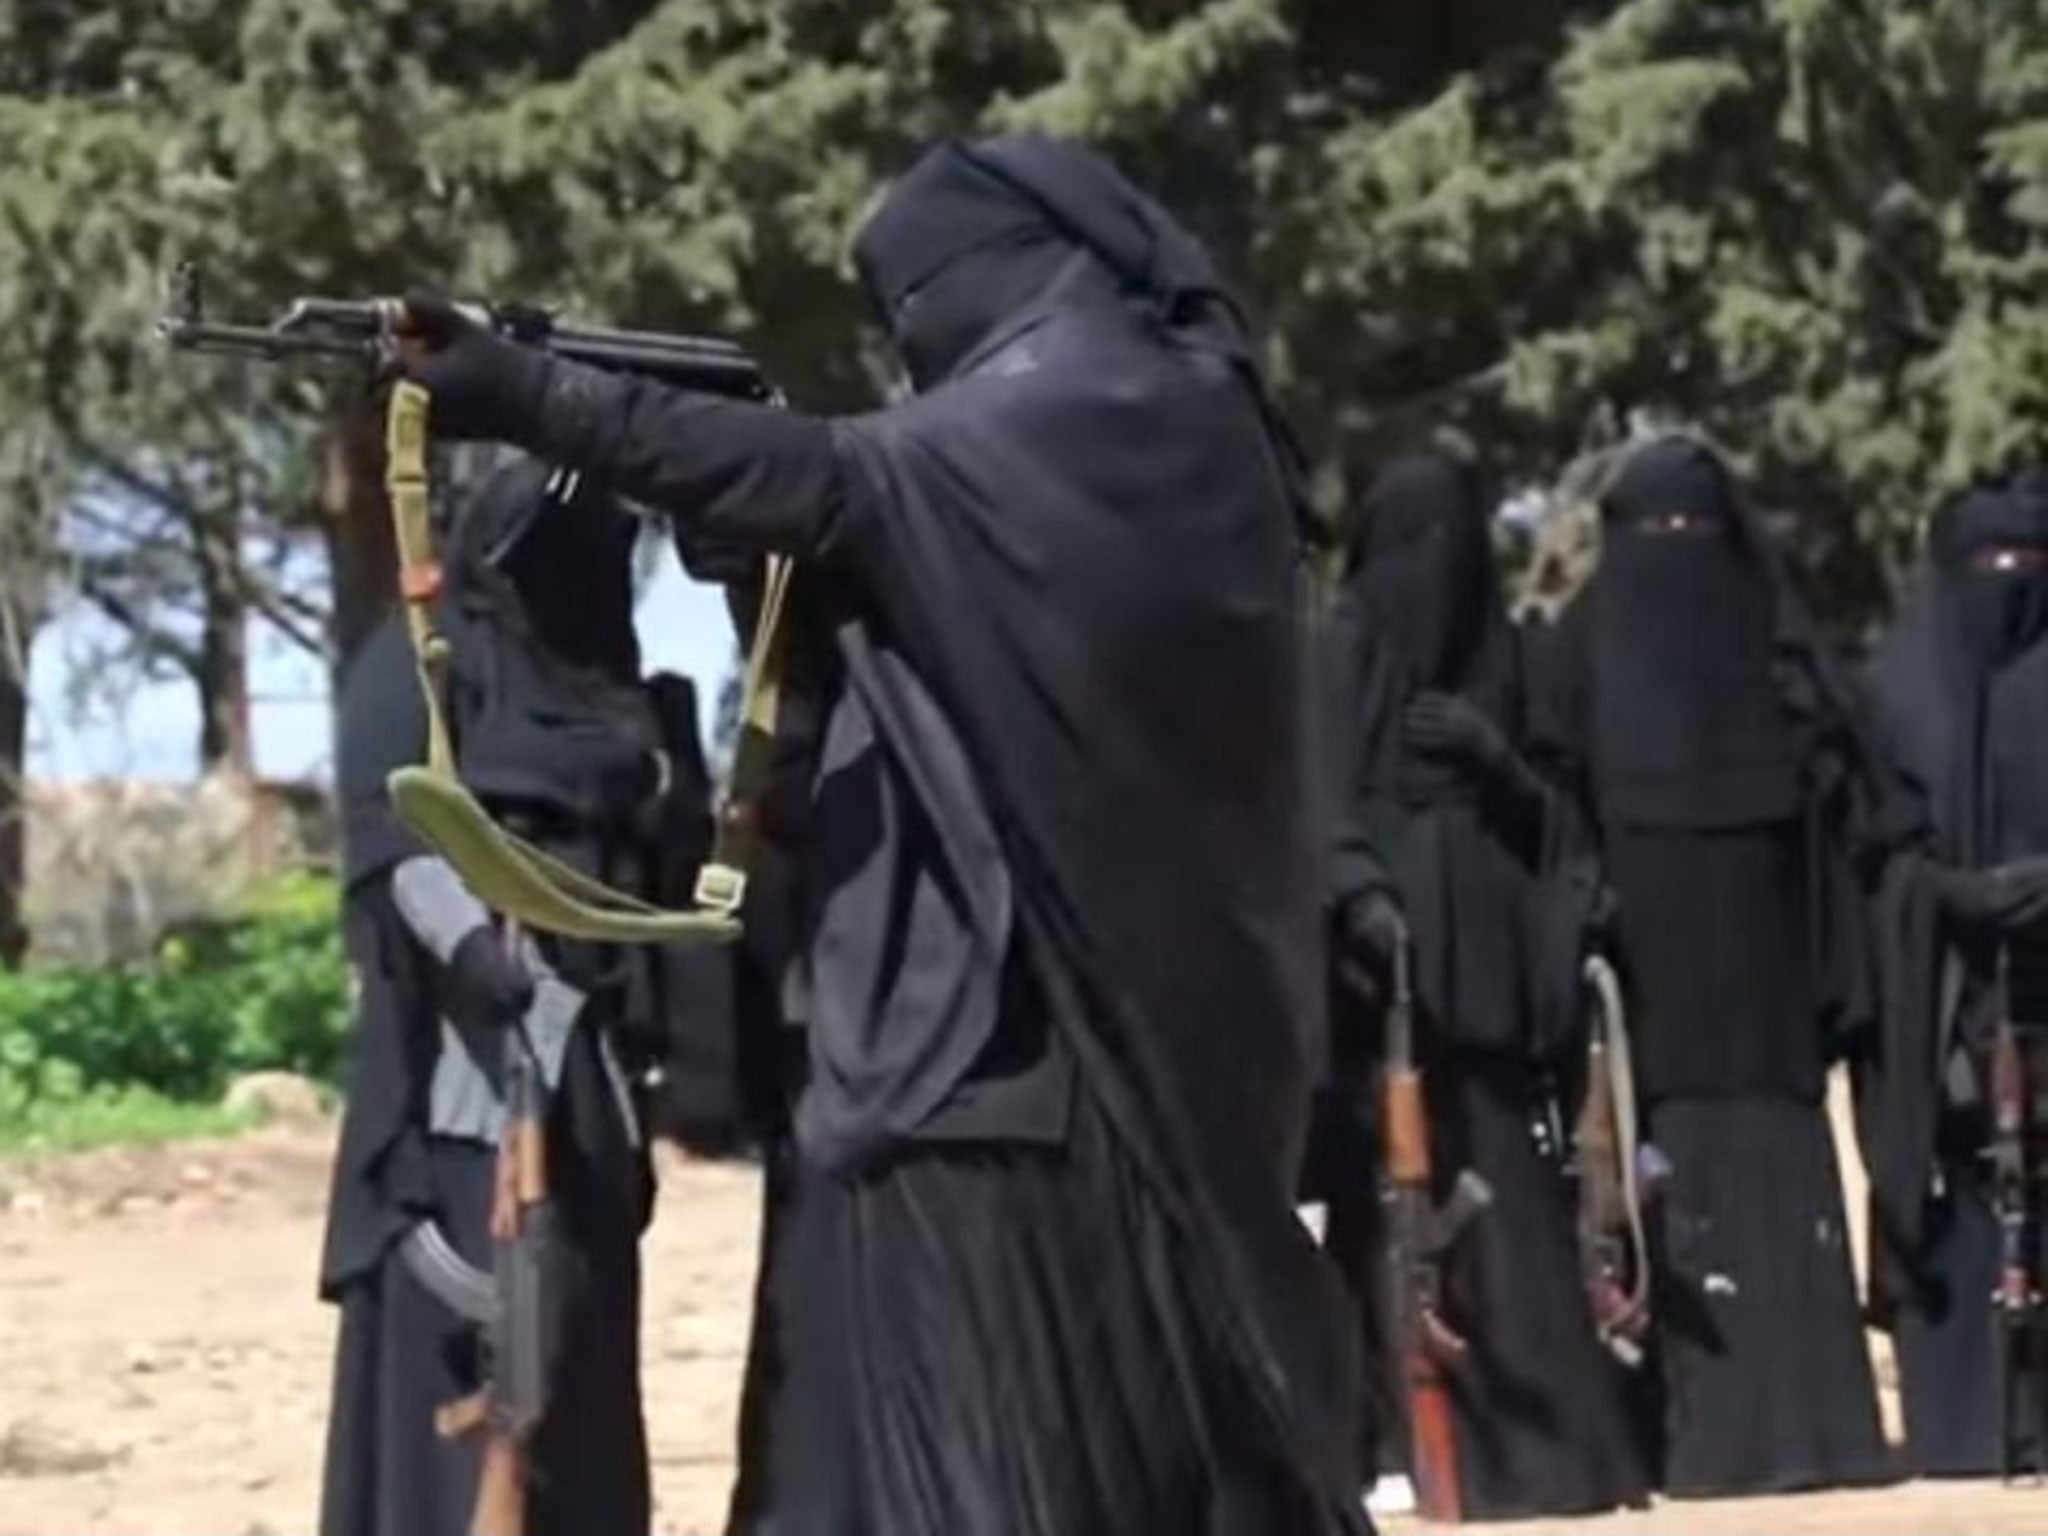 Isis has released a propaganda video showing women in training camps 